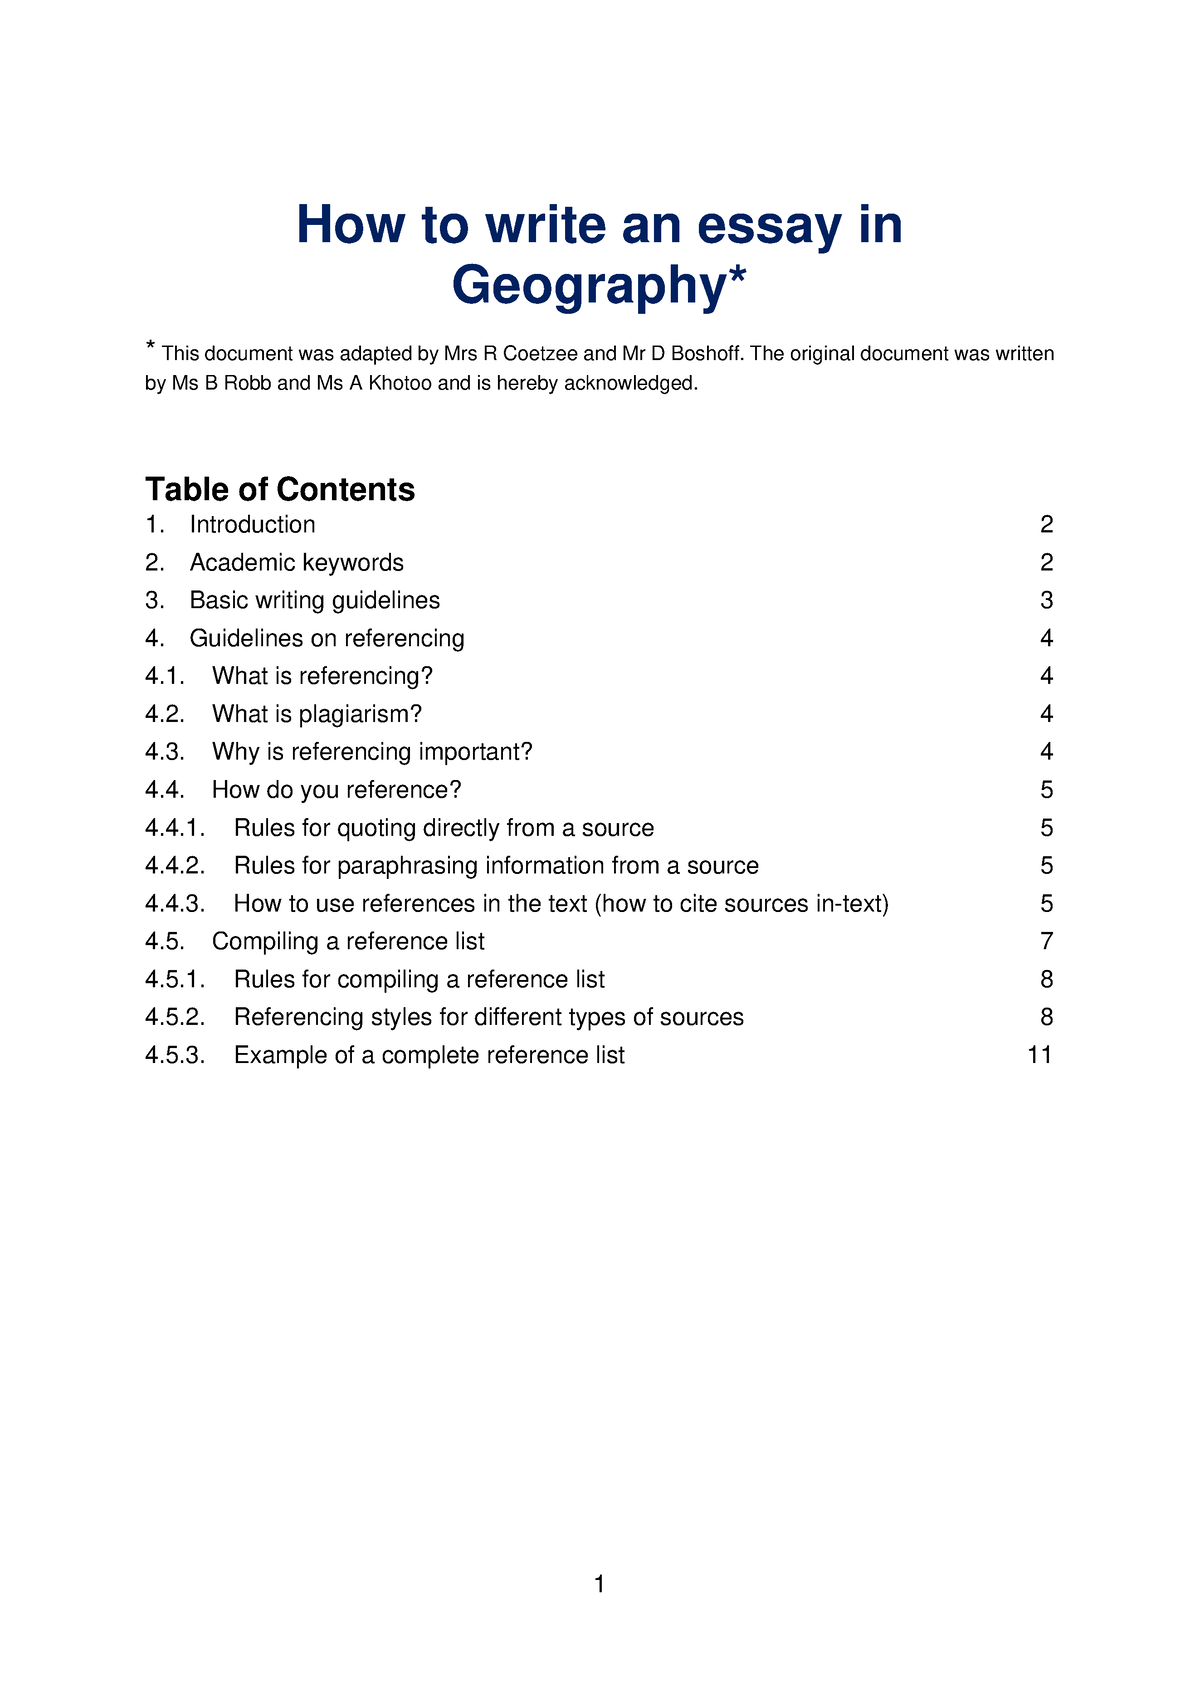 how to write a geography essay ib